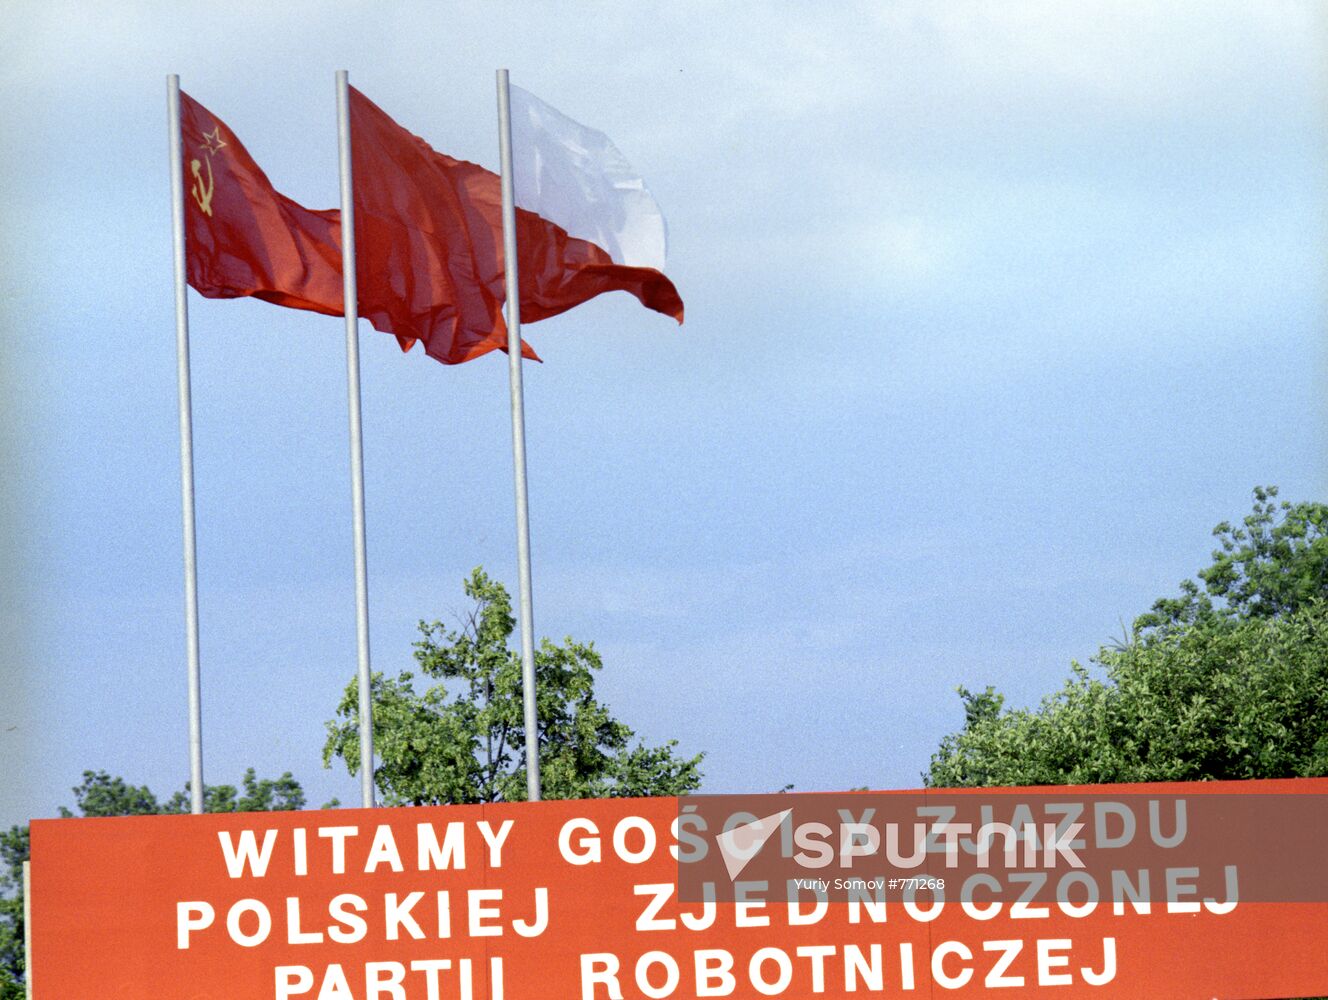 Greeting to Polish United Workers Party congress delegates